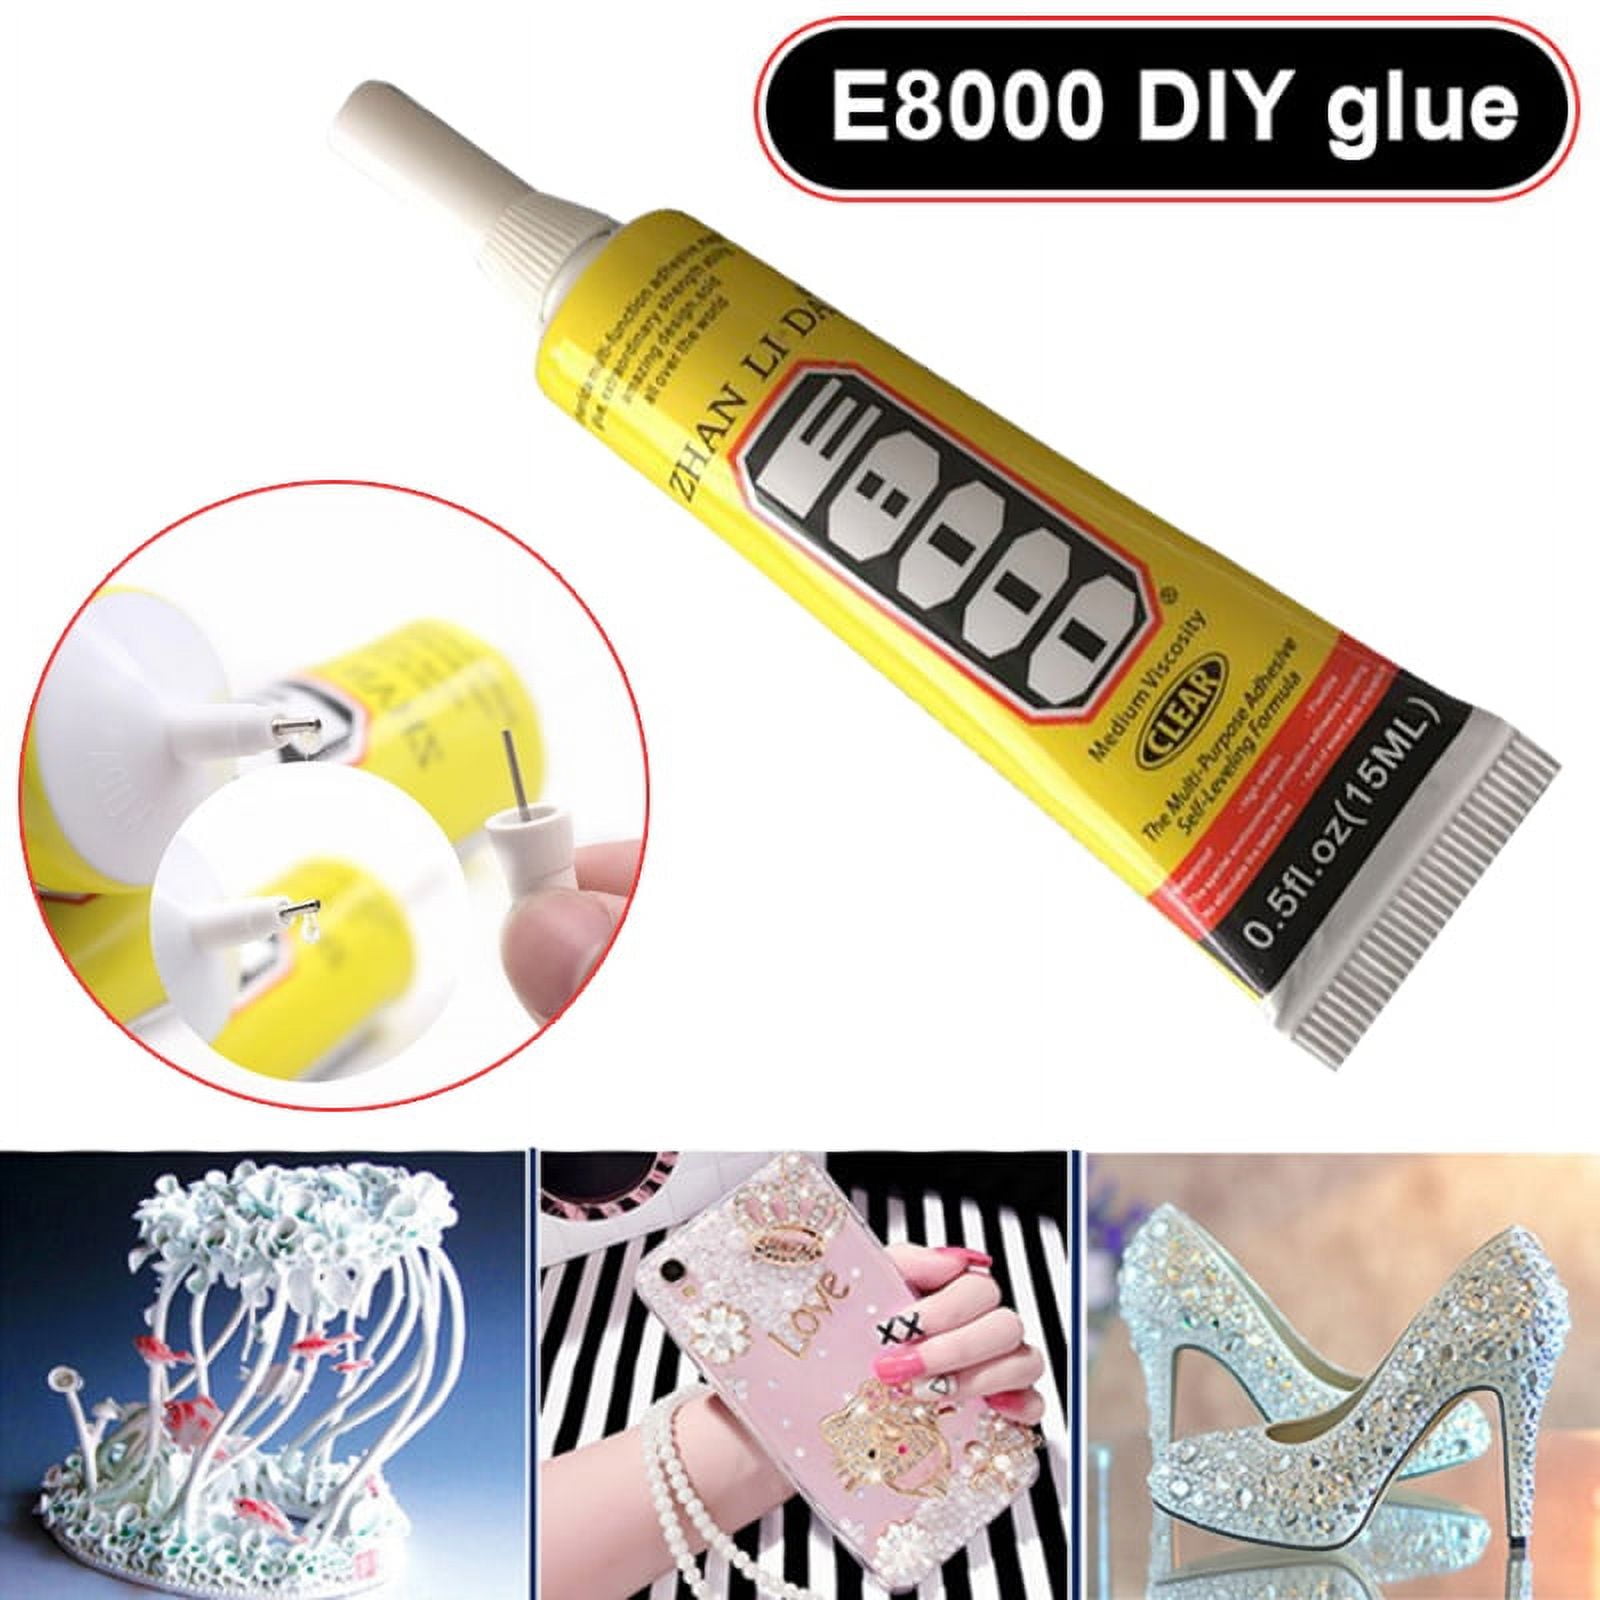  E8000 Multipurpose Adhesive, High Performance Liquid Glue,  Super Strong Adhesive for Glass Jewelry Crafts Rhinestone Nail DIY Fix  Phone Screen Glass : Arts, Crafts & Sewing